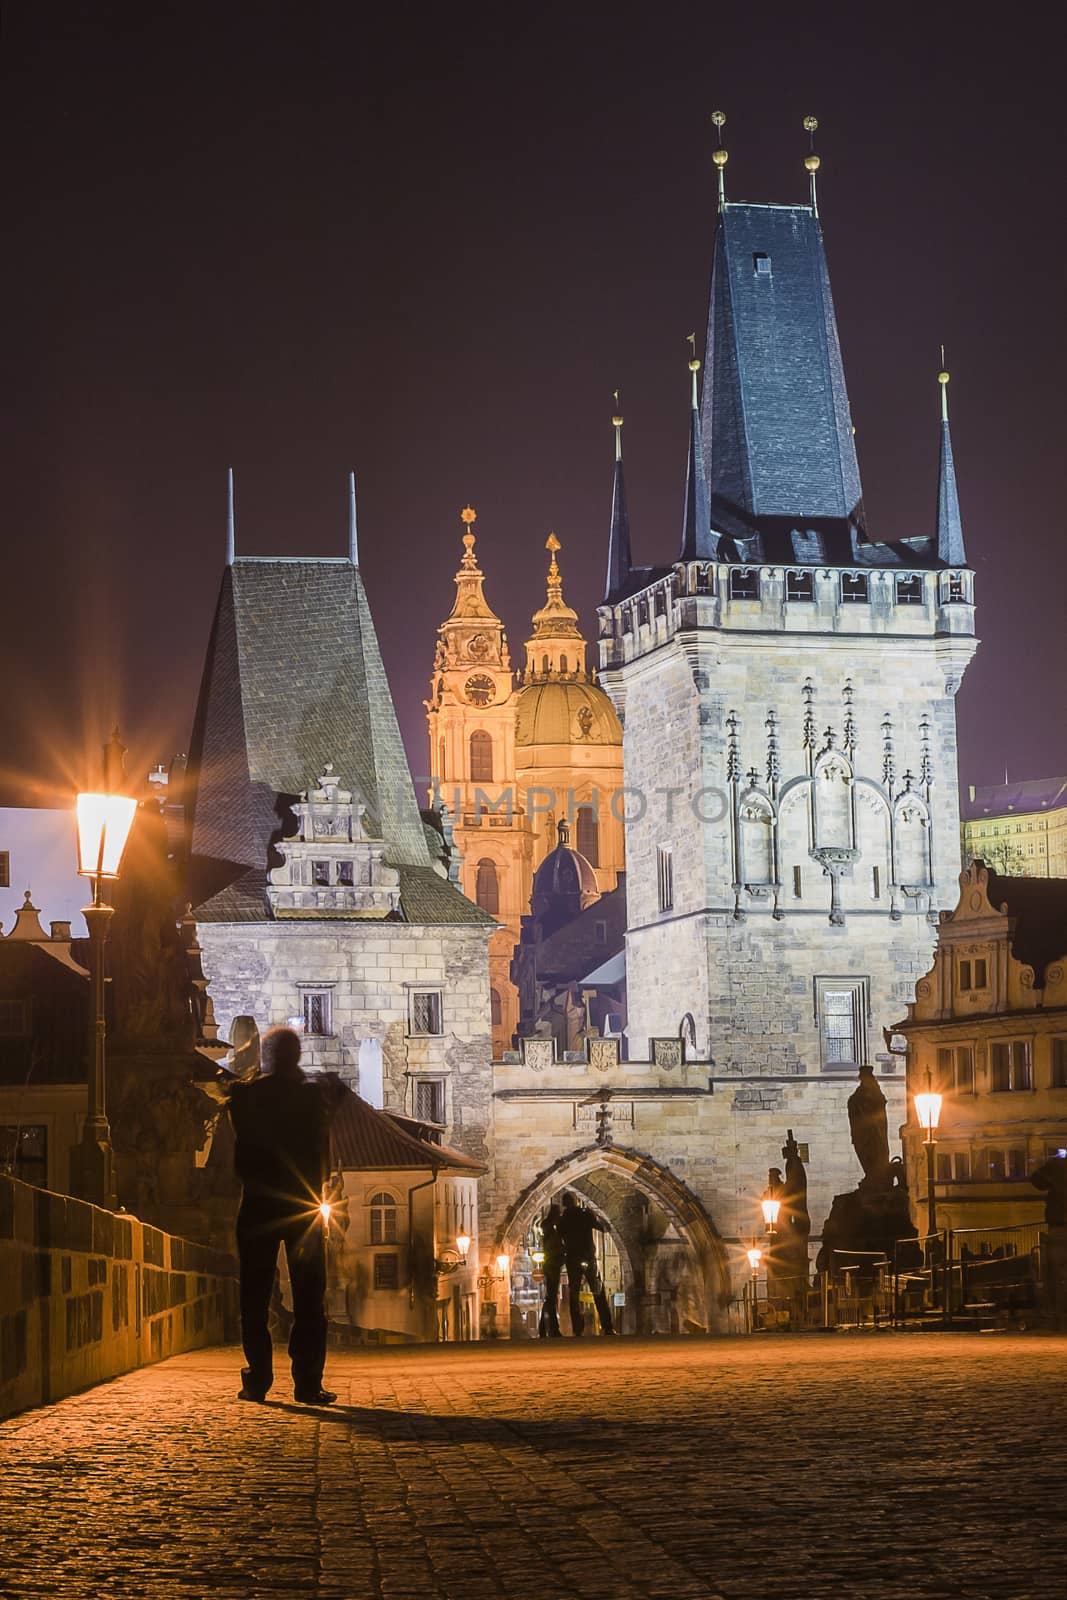 Famous tower at the Charles bridge in Prague

